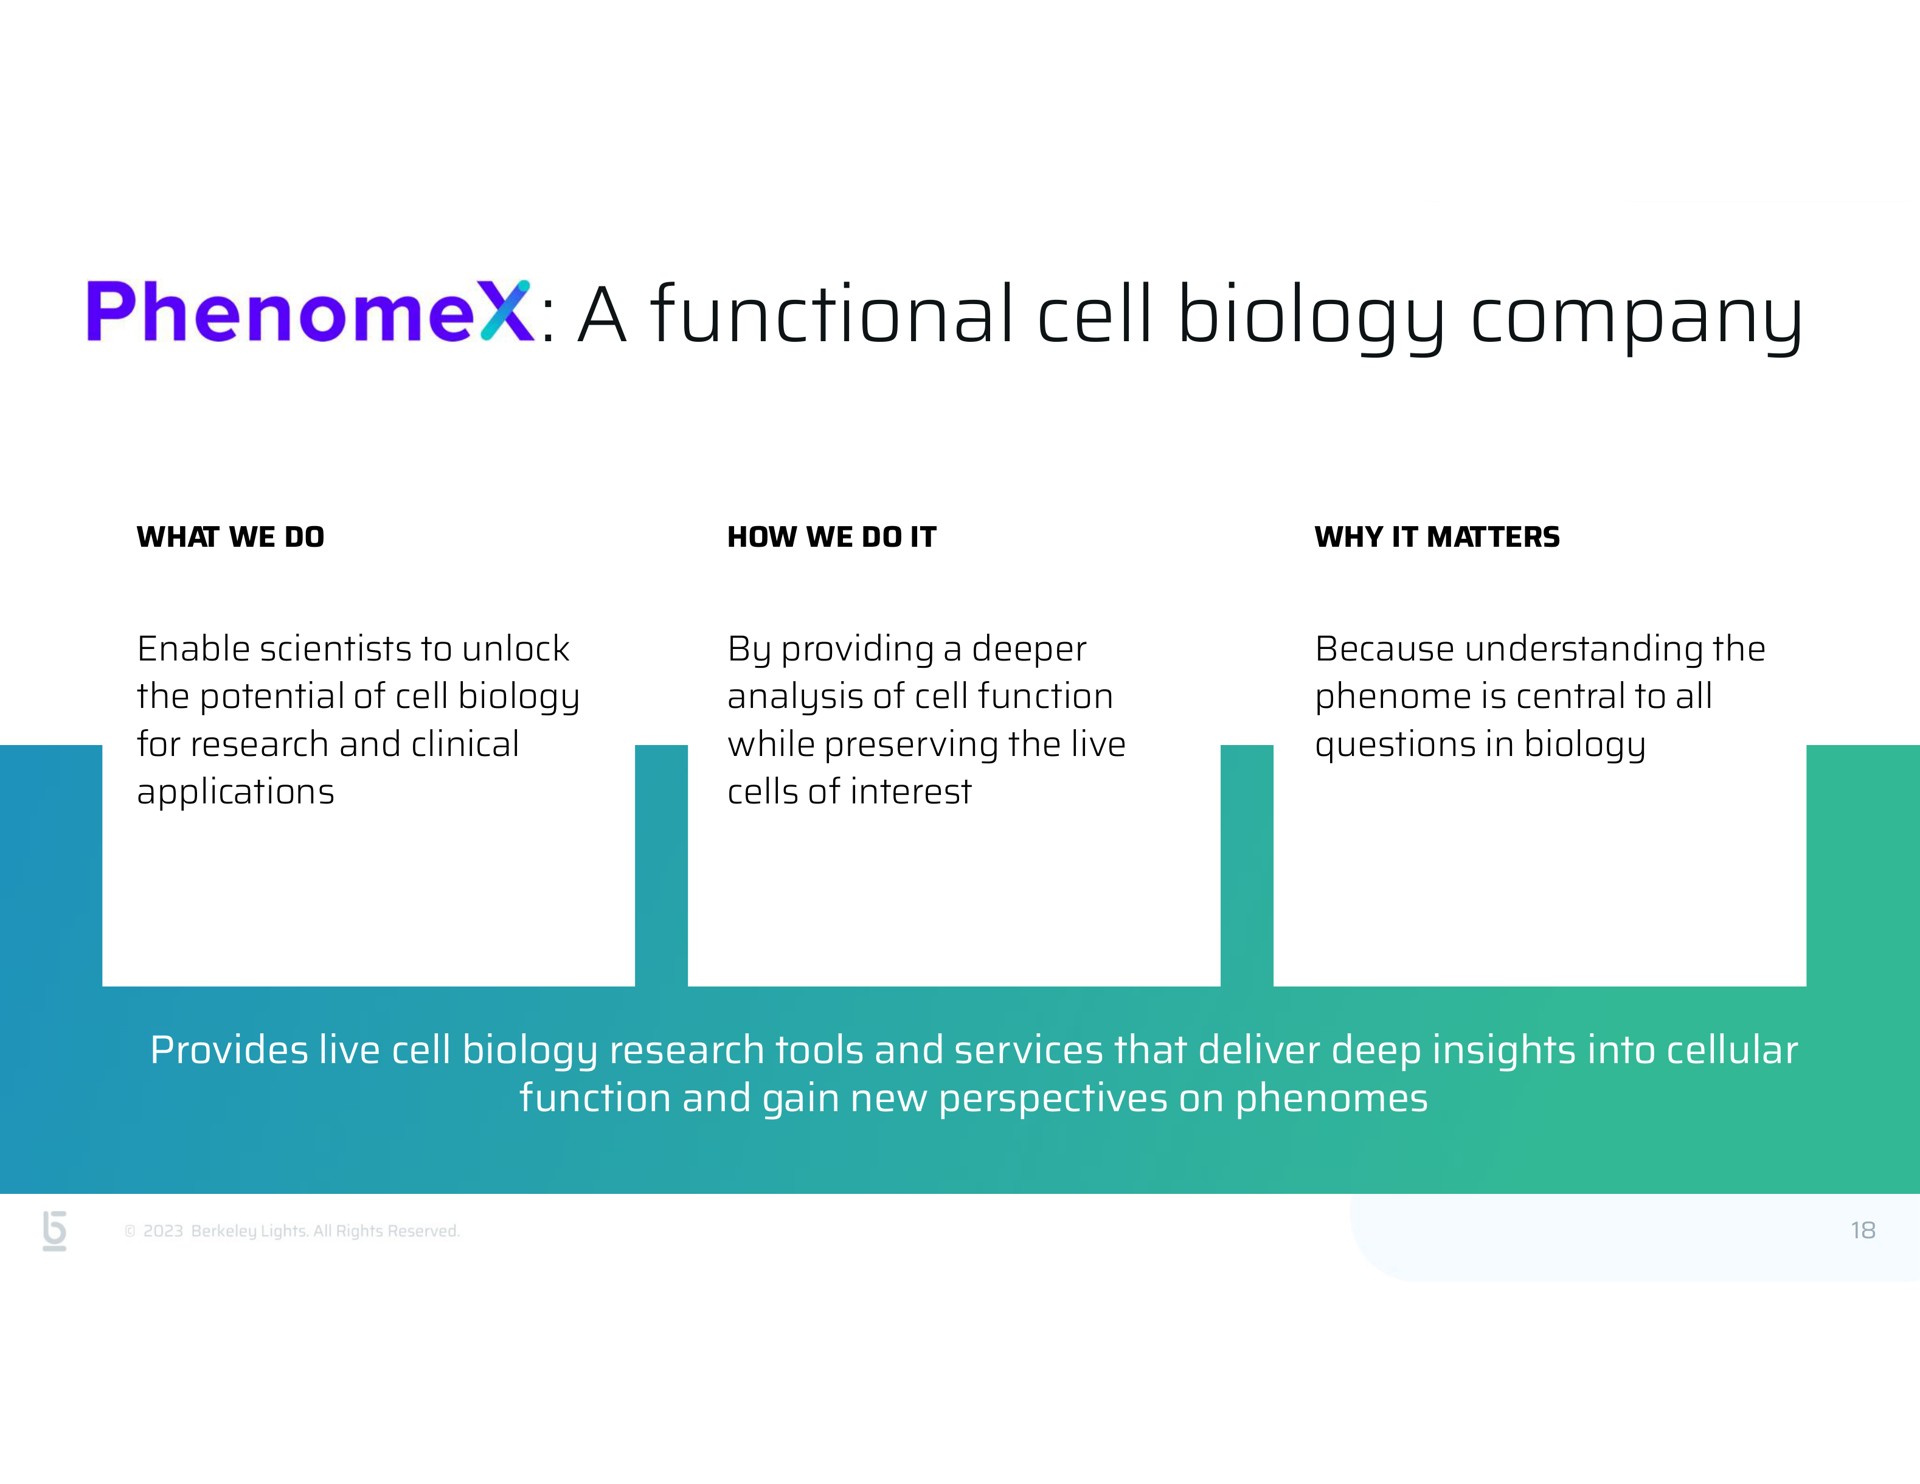 a functional cell biology company | Berkeley Lights